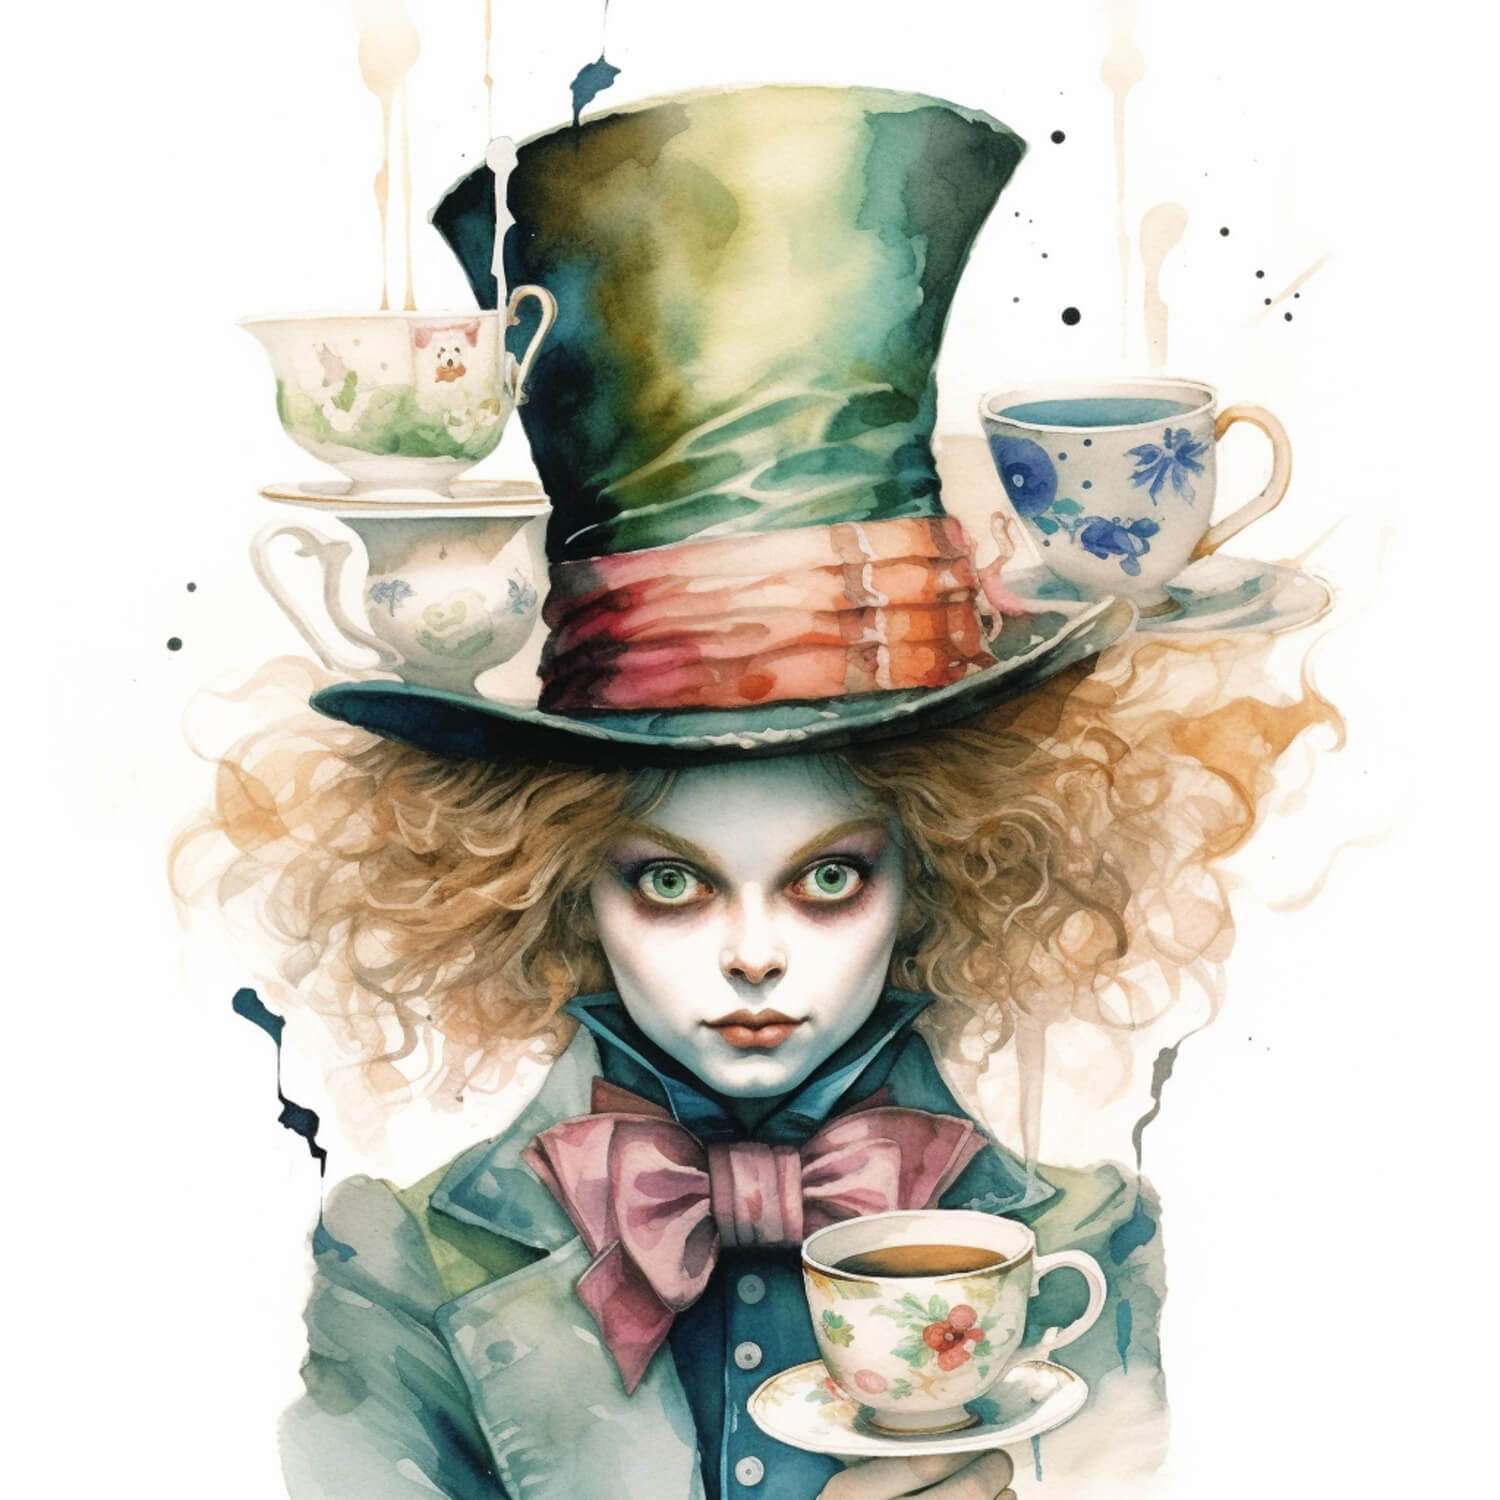 quotes from alice in wonderland mad hatter